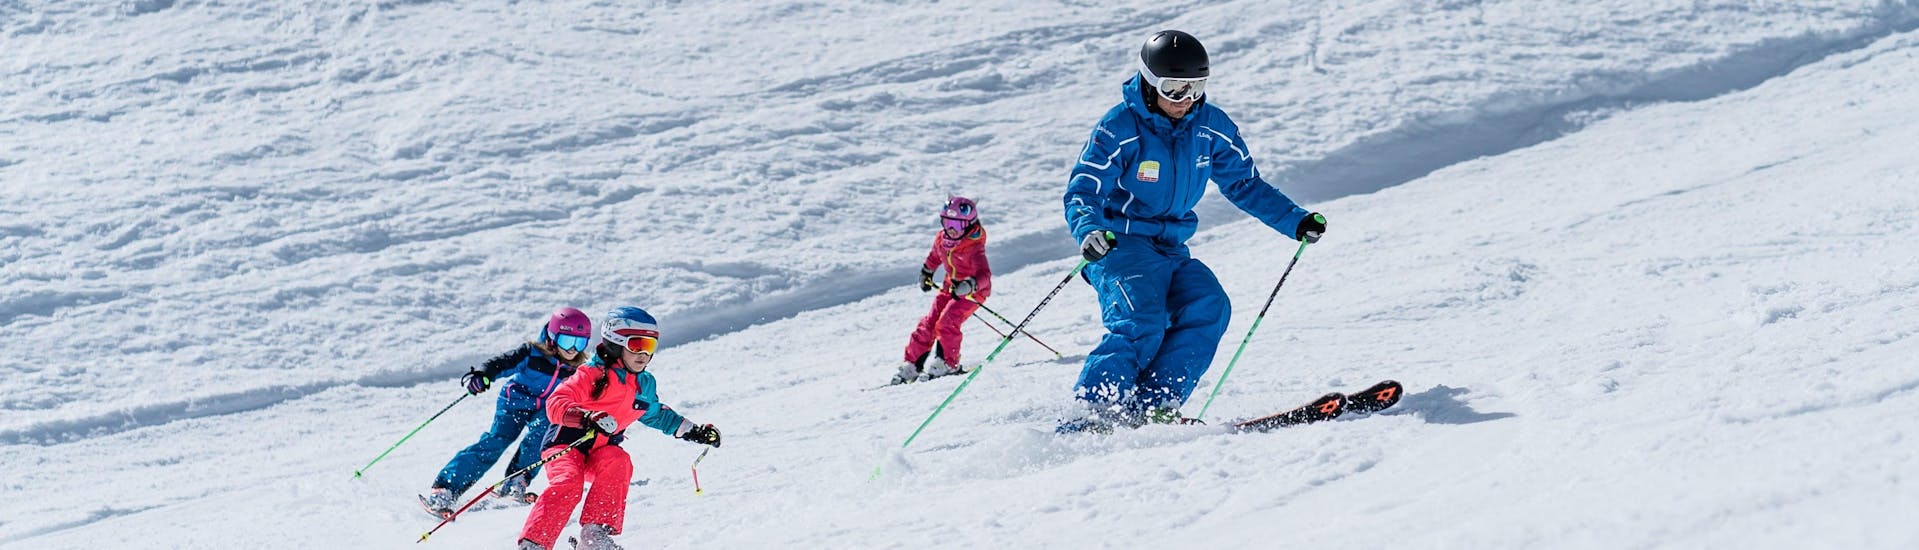 Kids Ski Lessons "All Inclusive" (6-14 y.) for All Levels.